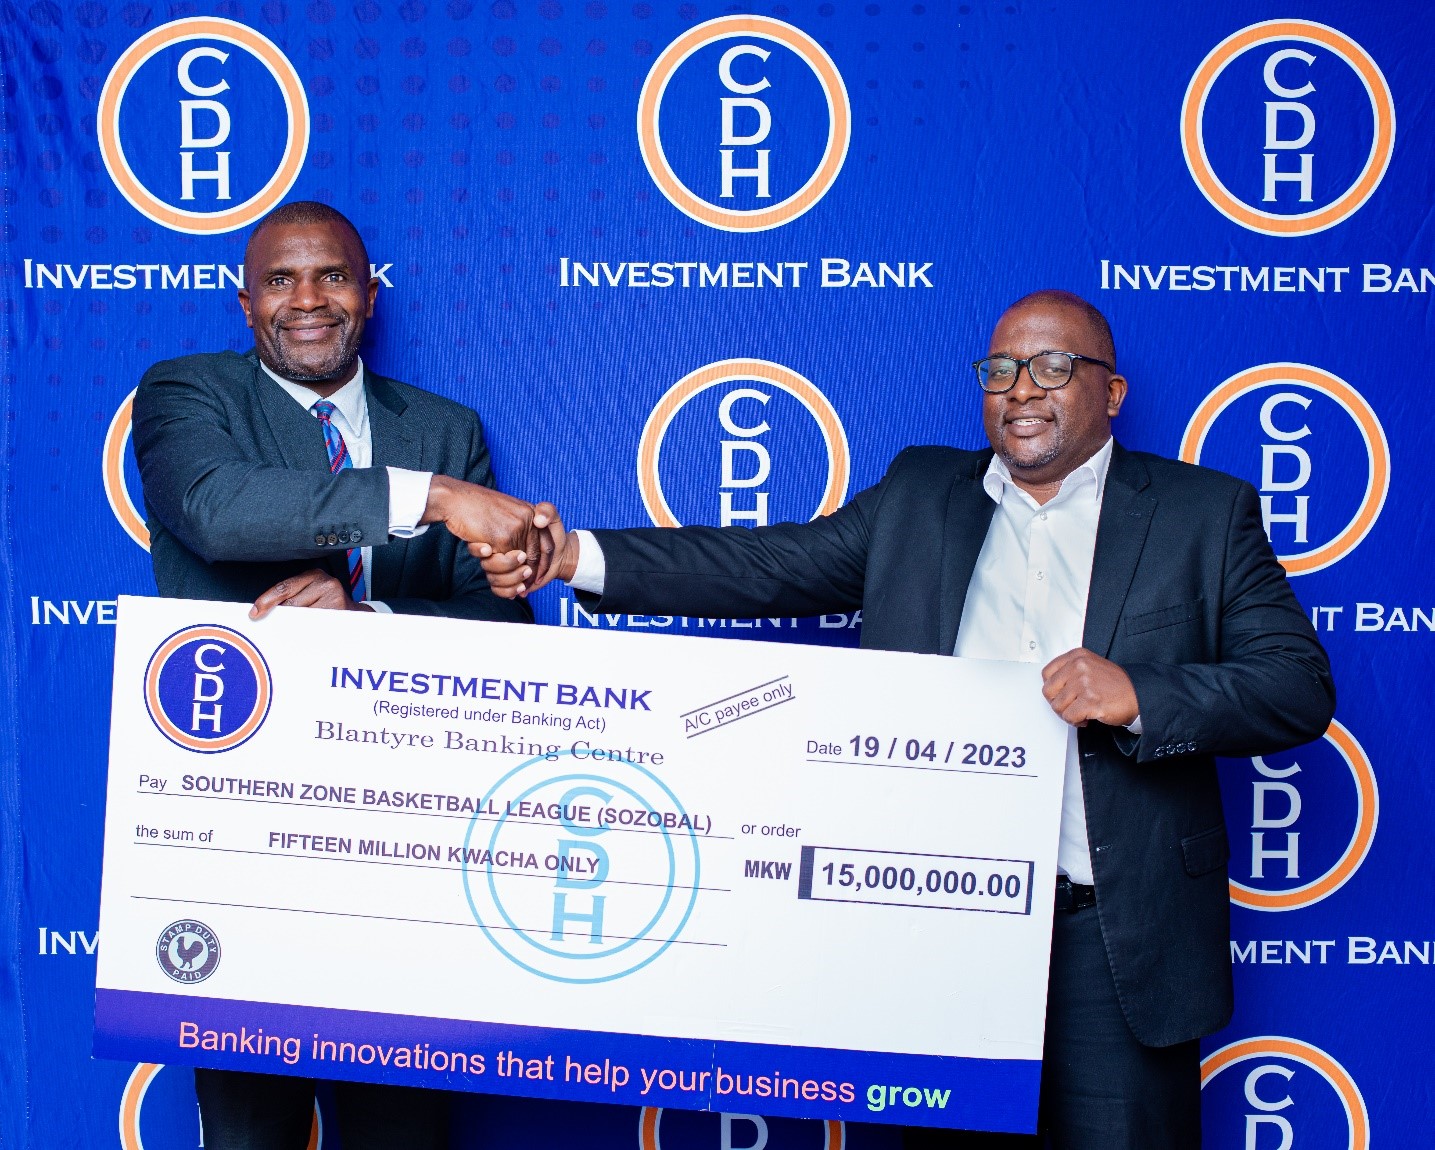 CDH Investment Bank boosts Southern Zone Basketball League (SOZOBAL) with K15million